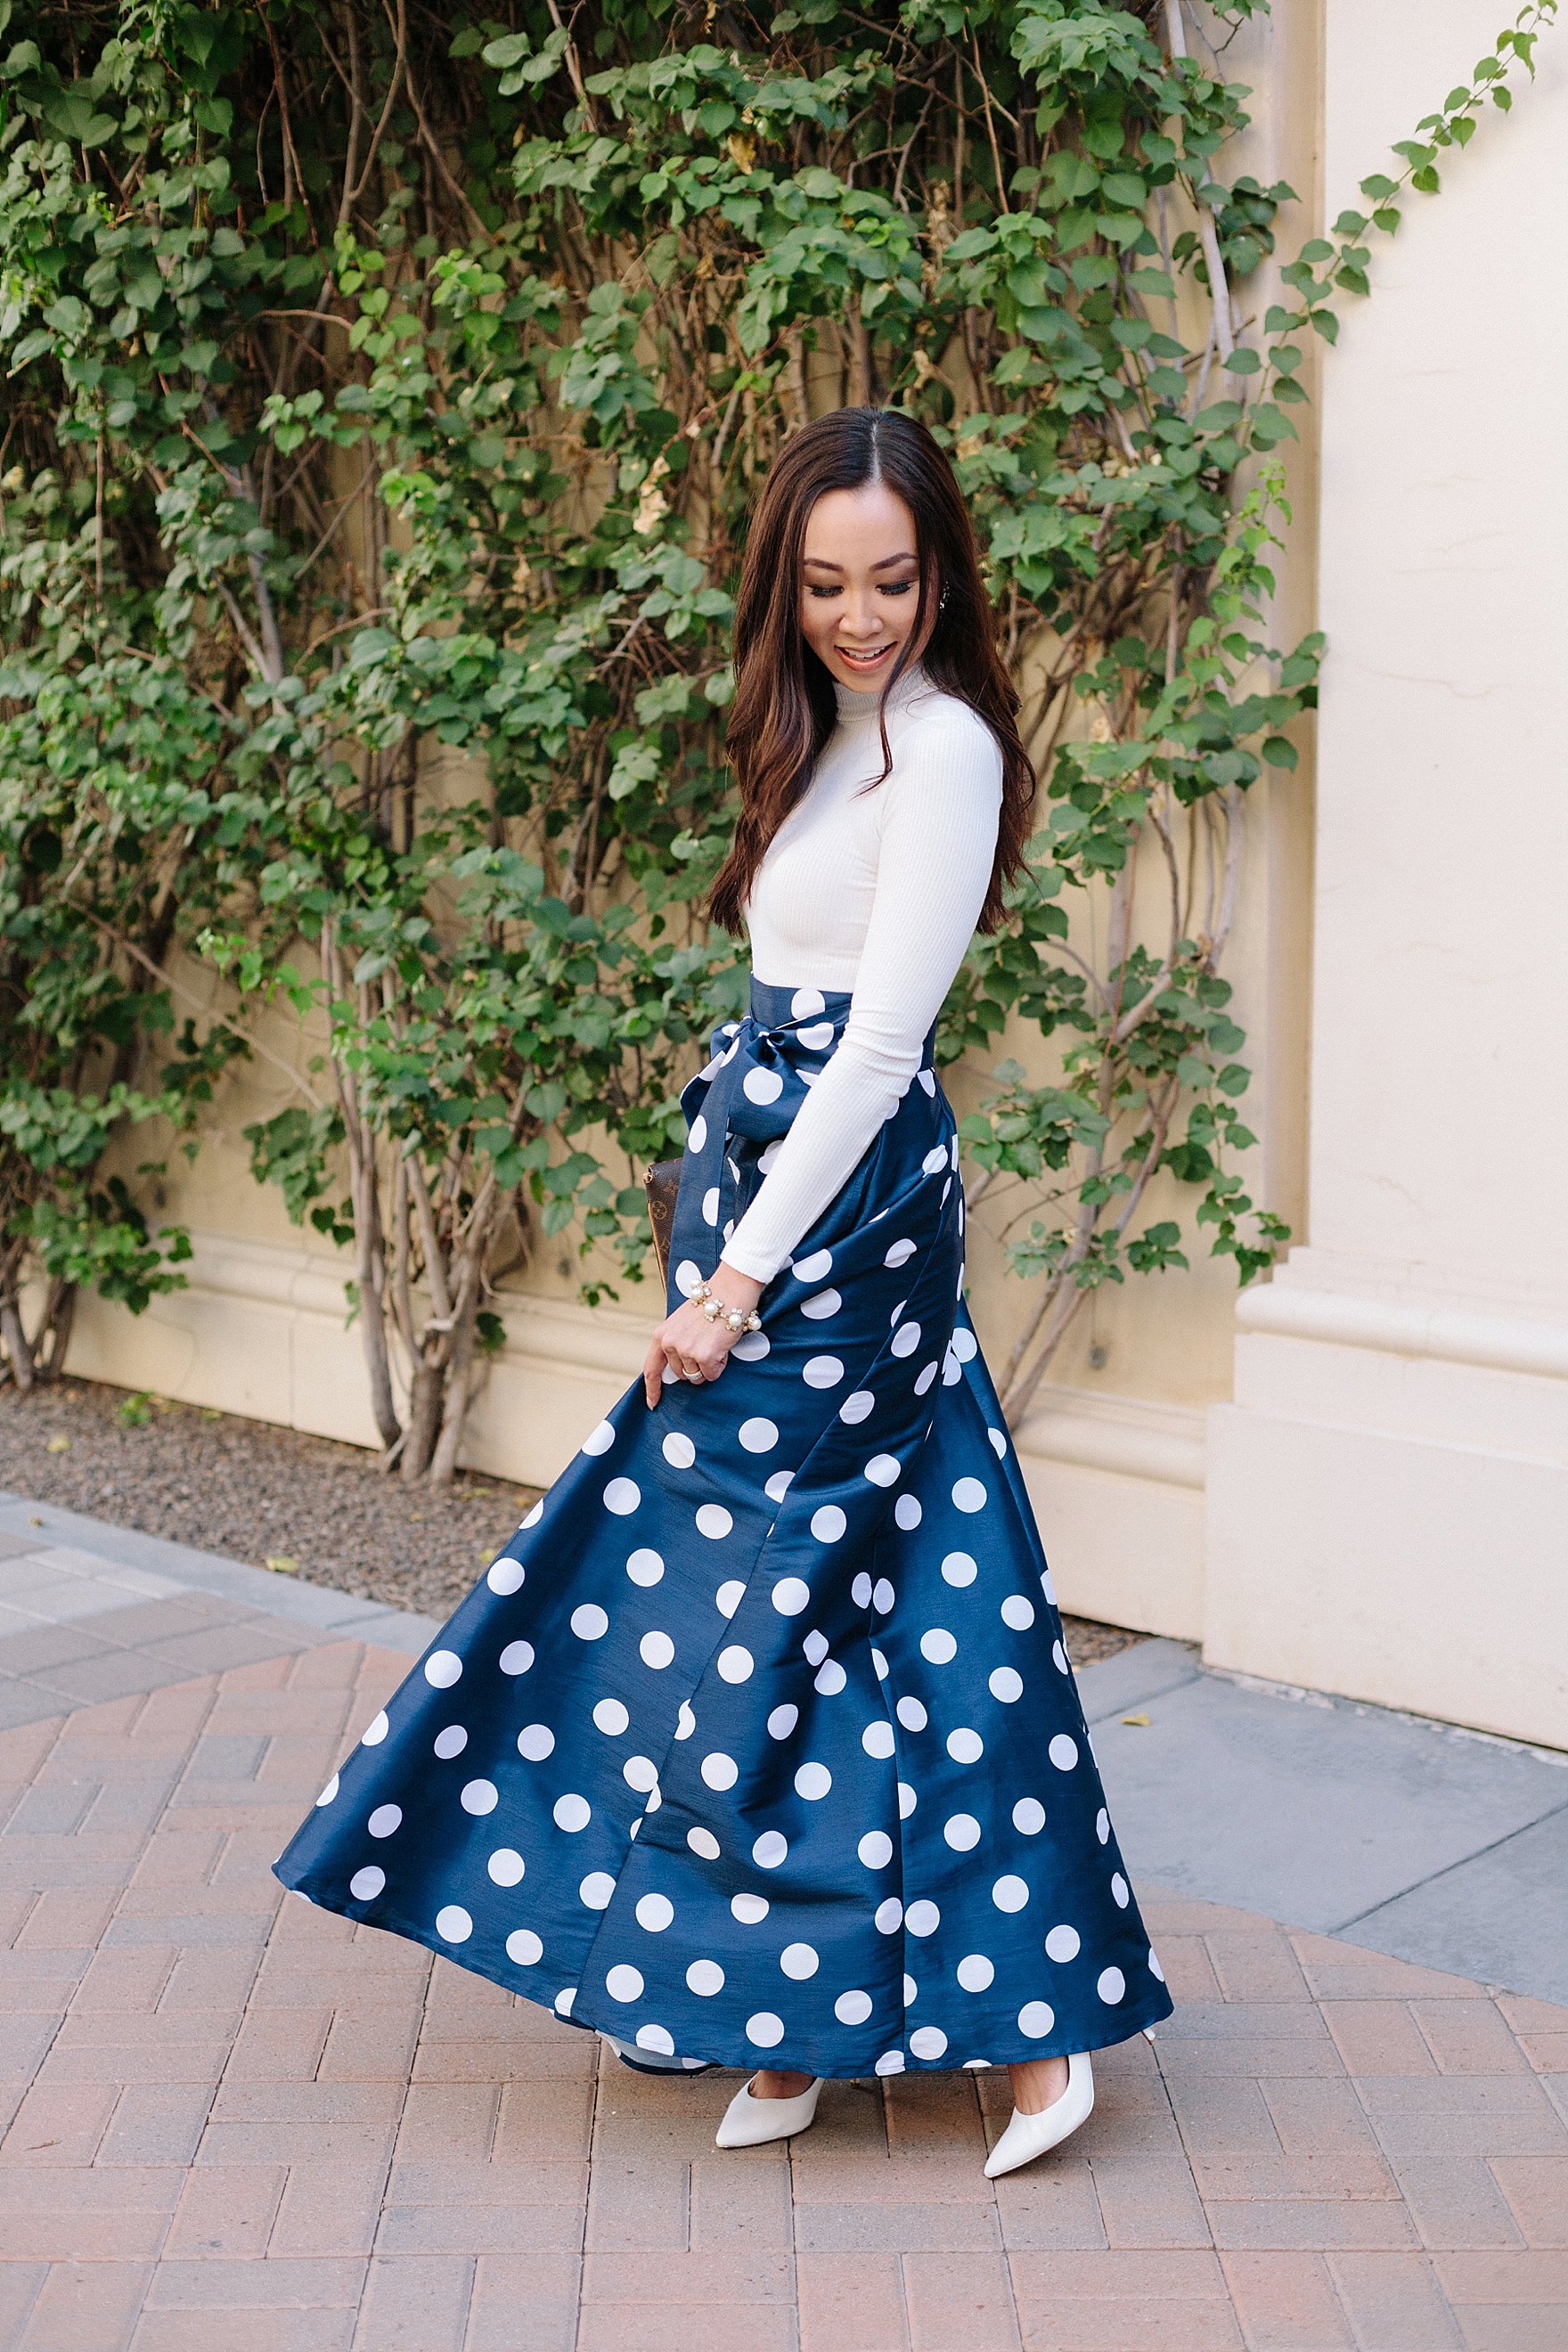 blue and white polka dot long skirt custom by eShakti with pockets! Great holiday dress outfit look on blogger Diana Elizabeth